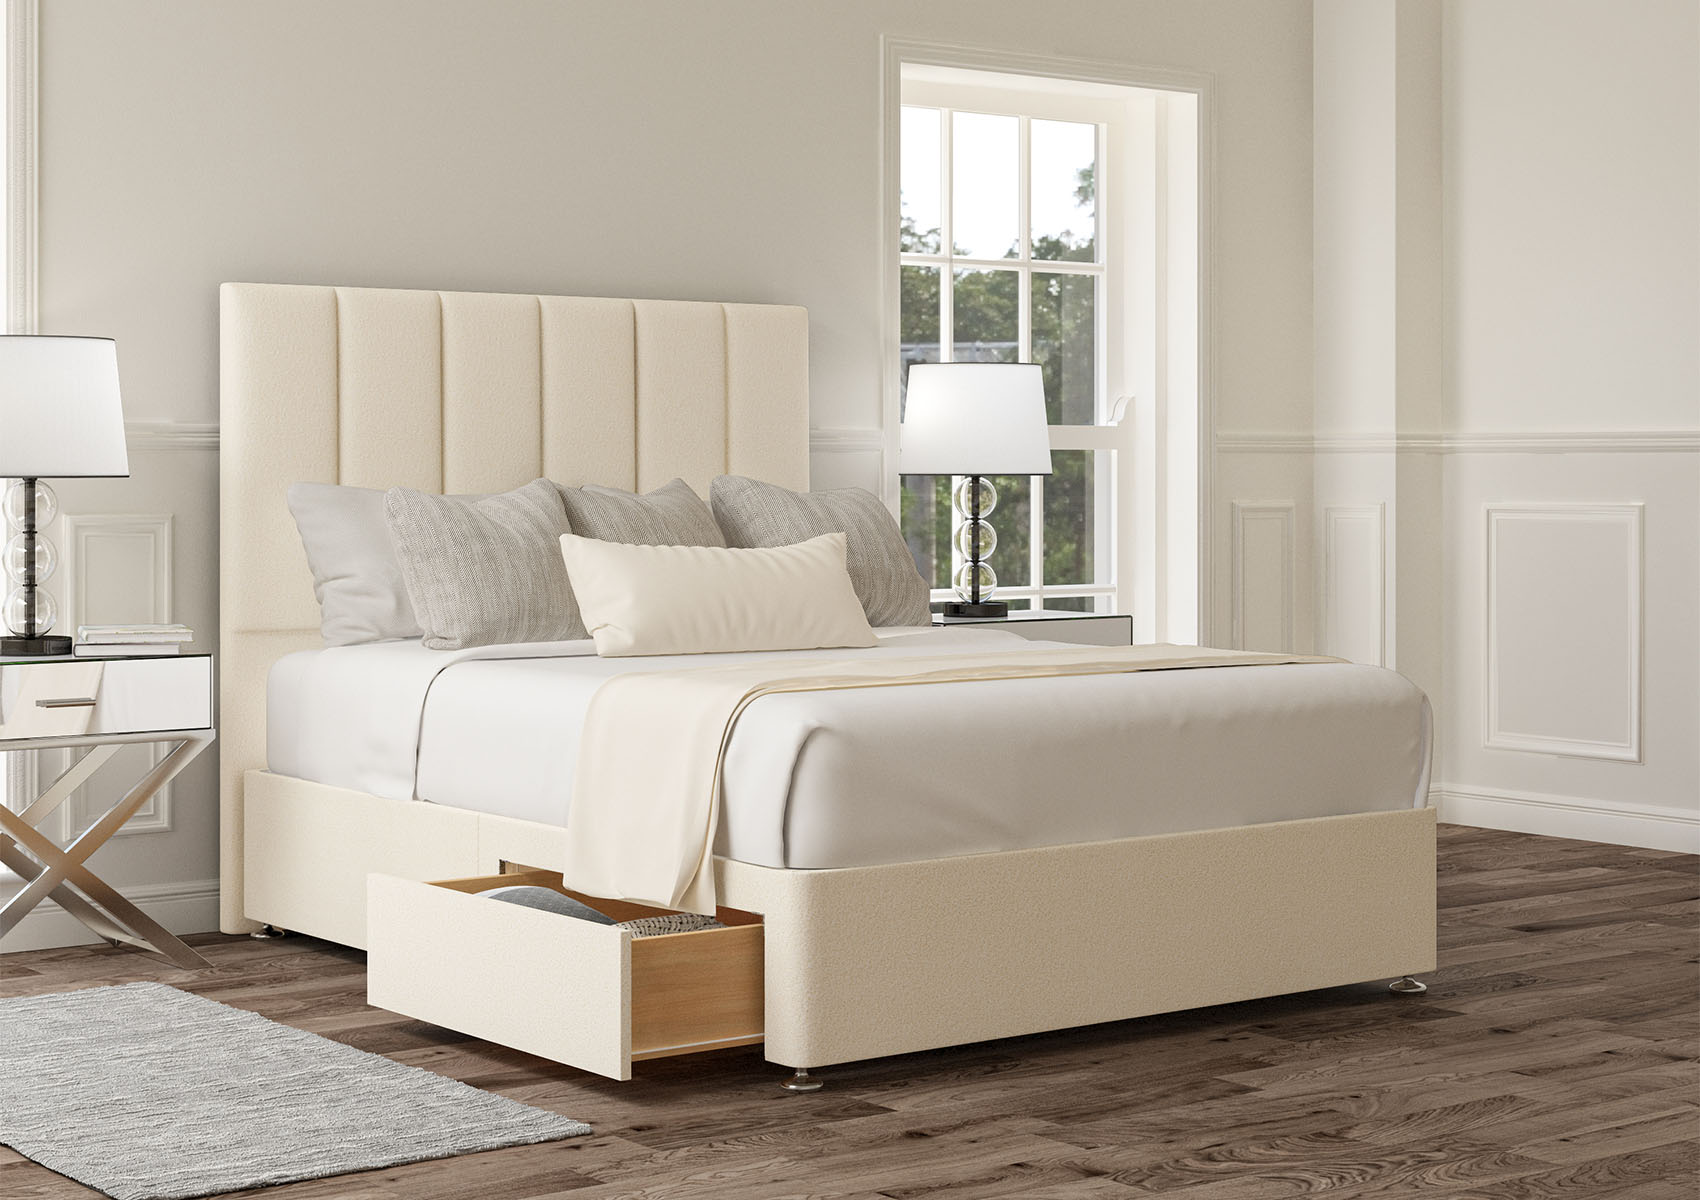 View Empire Teddy Cream Upholstered Double Divan Bed Time4Sleep information